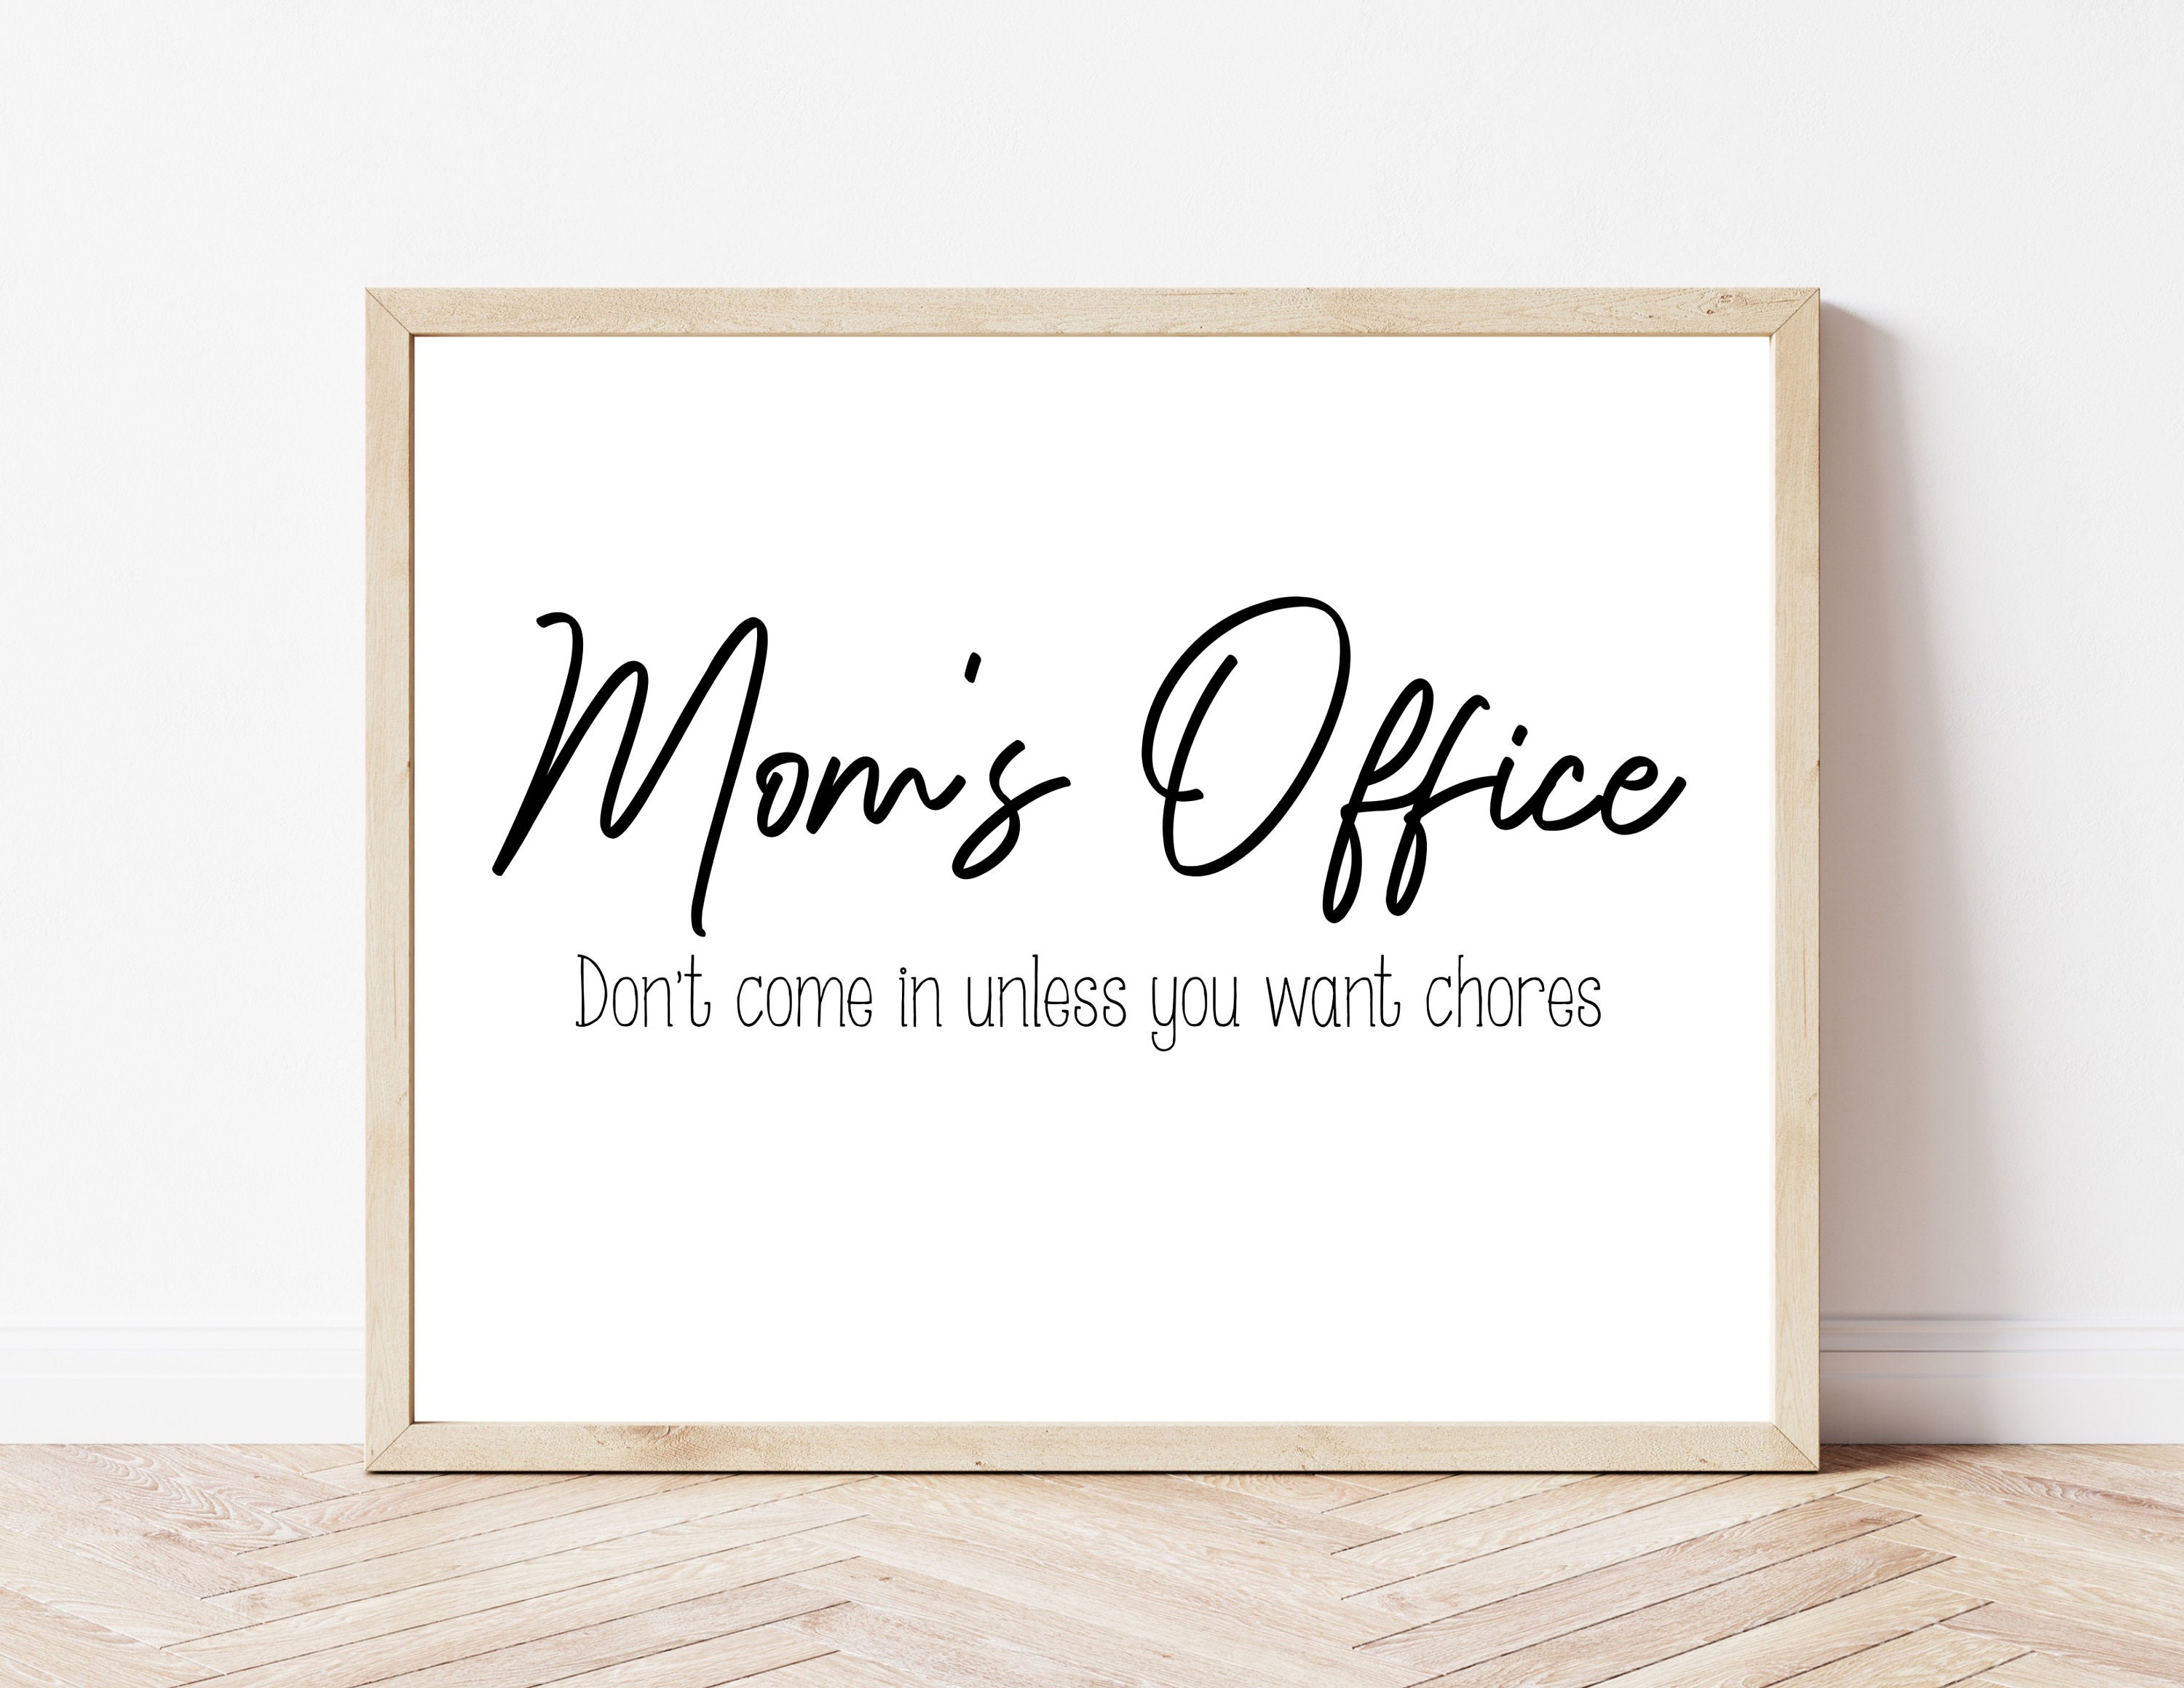 Funny Office Printablemom's Office Don't Come in - Etsy